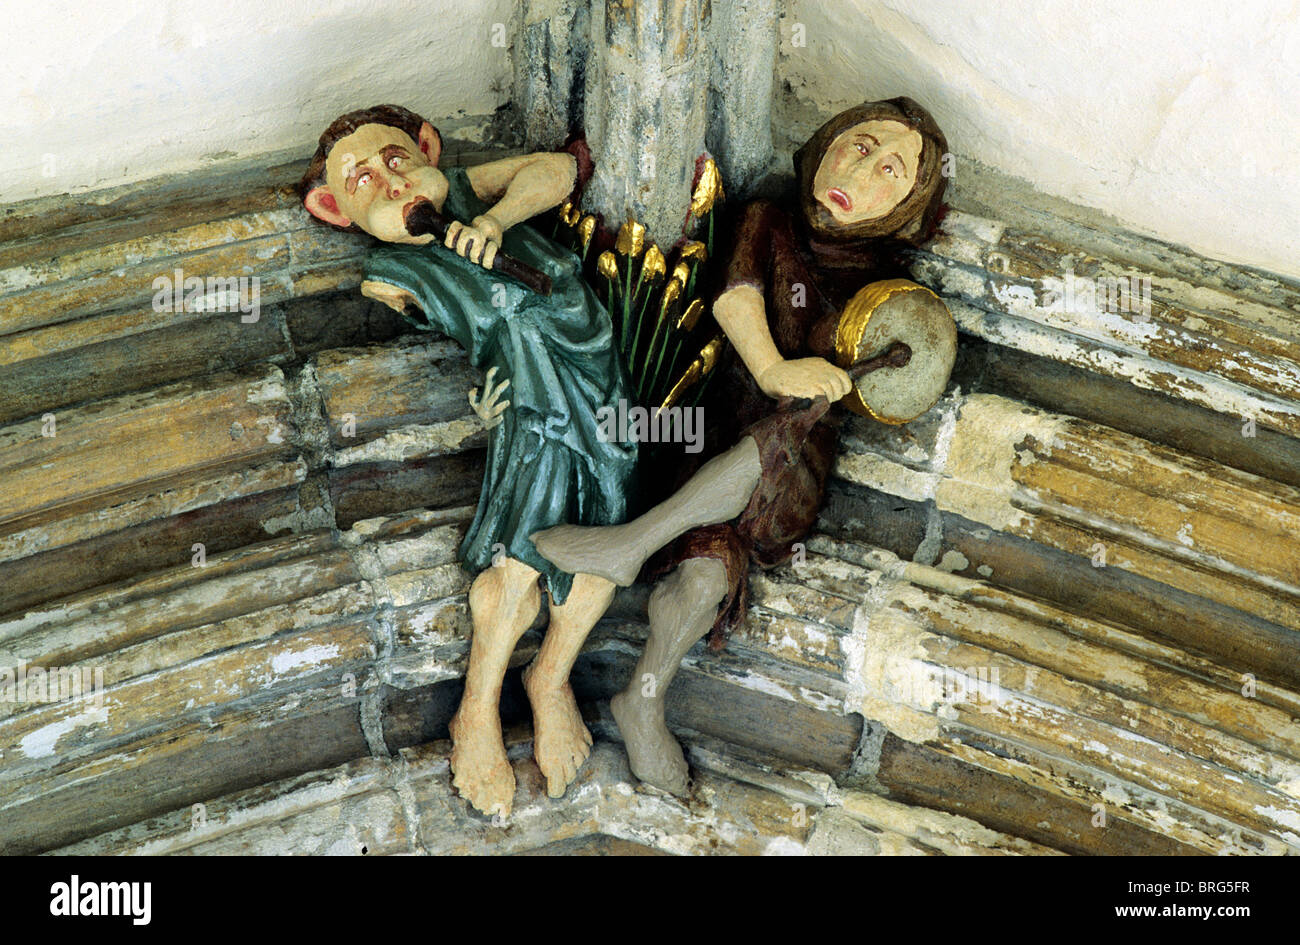 Norwich Cathedral Cloisters, roof boss, medieval musicians minstrels music bosses figure figures painted stone carving carvings Stock Photo